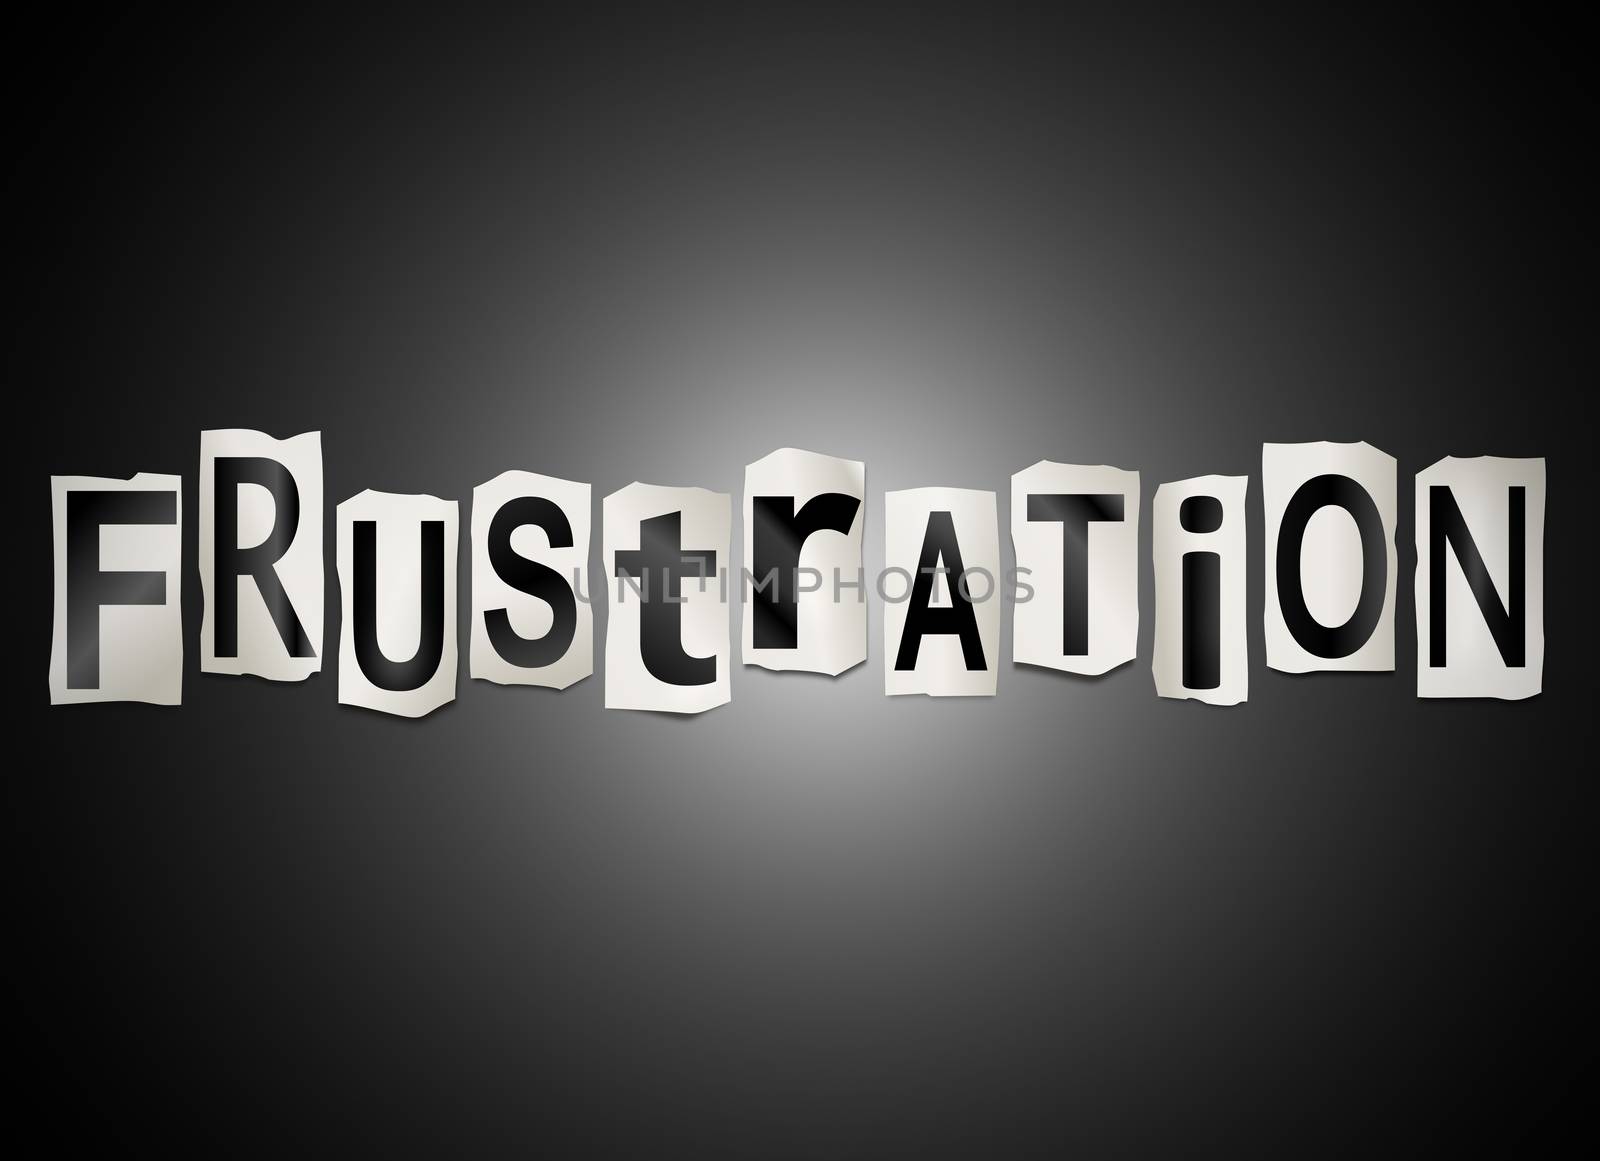 Illustration depicting a set of cut out printed letters arranged to form the word frustration.